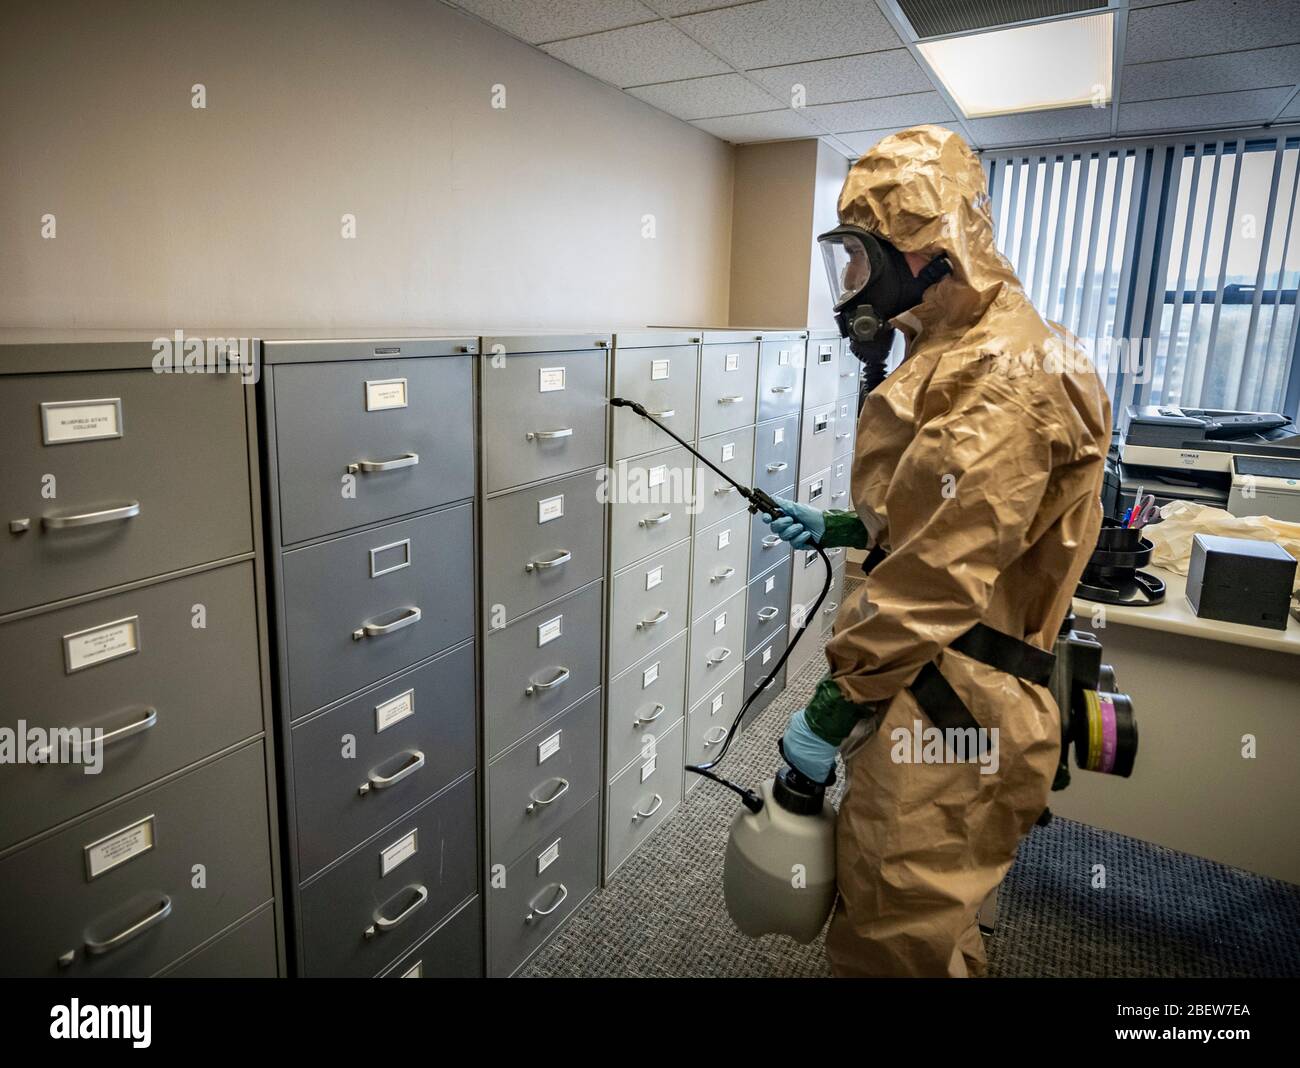 West Virginia National Guard soldiers sanitize workspaces for the West Virginia Higher Education Policy Commission from COVID-19, coronavirus April 11, 2020 in Charleston, West Virginia. Stock Photo